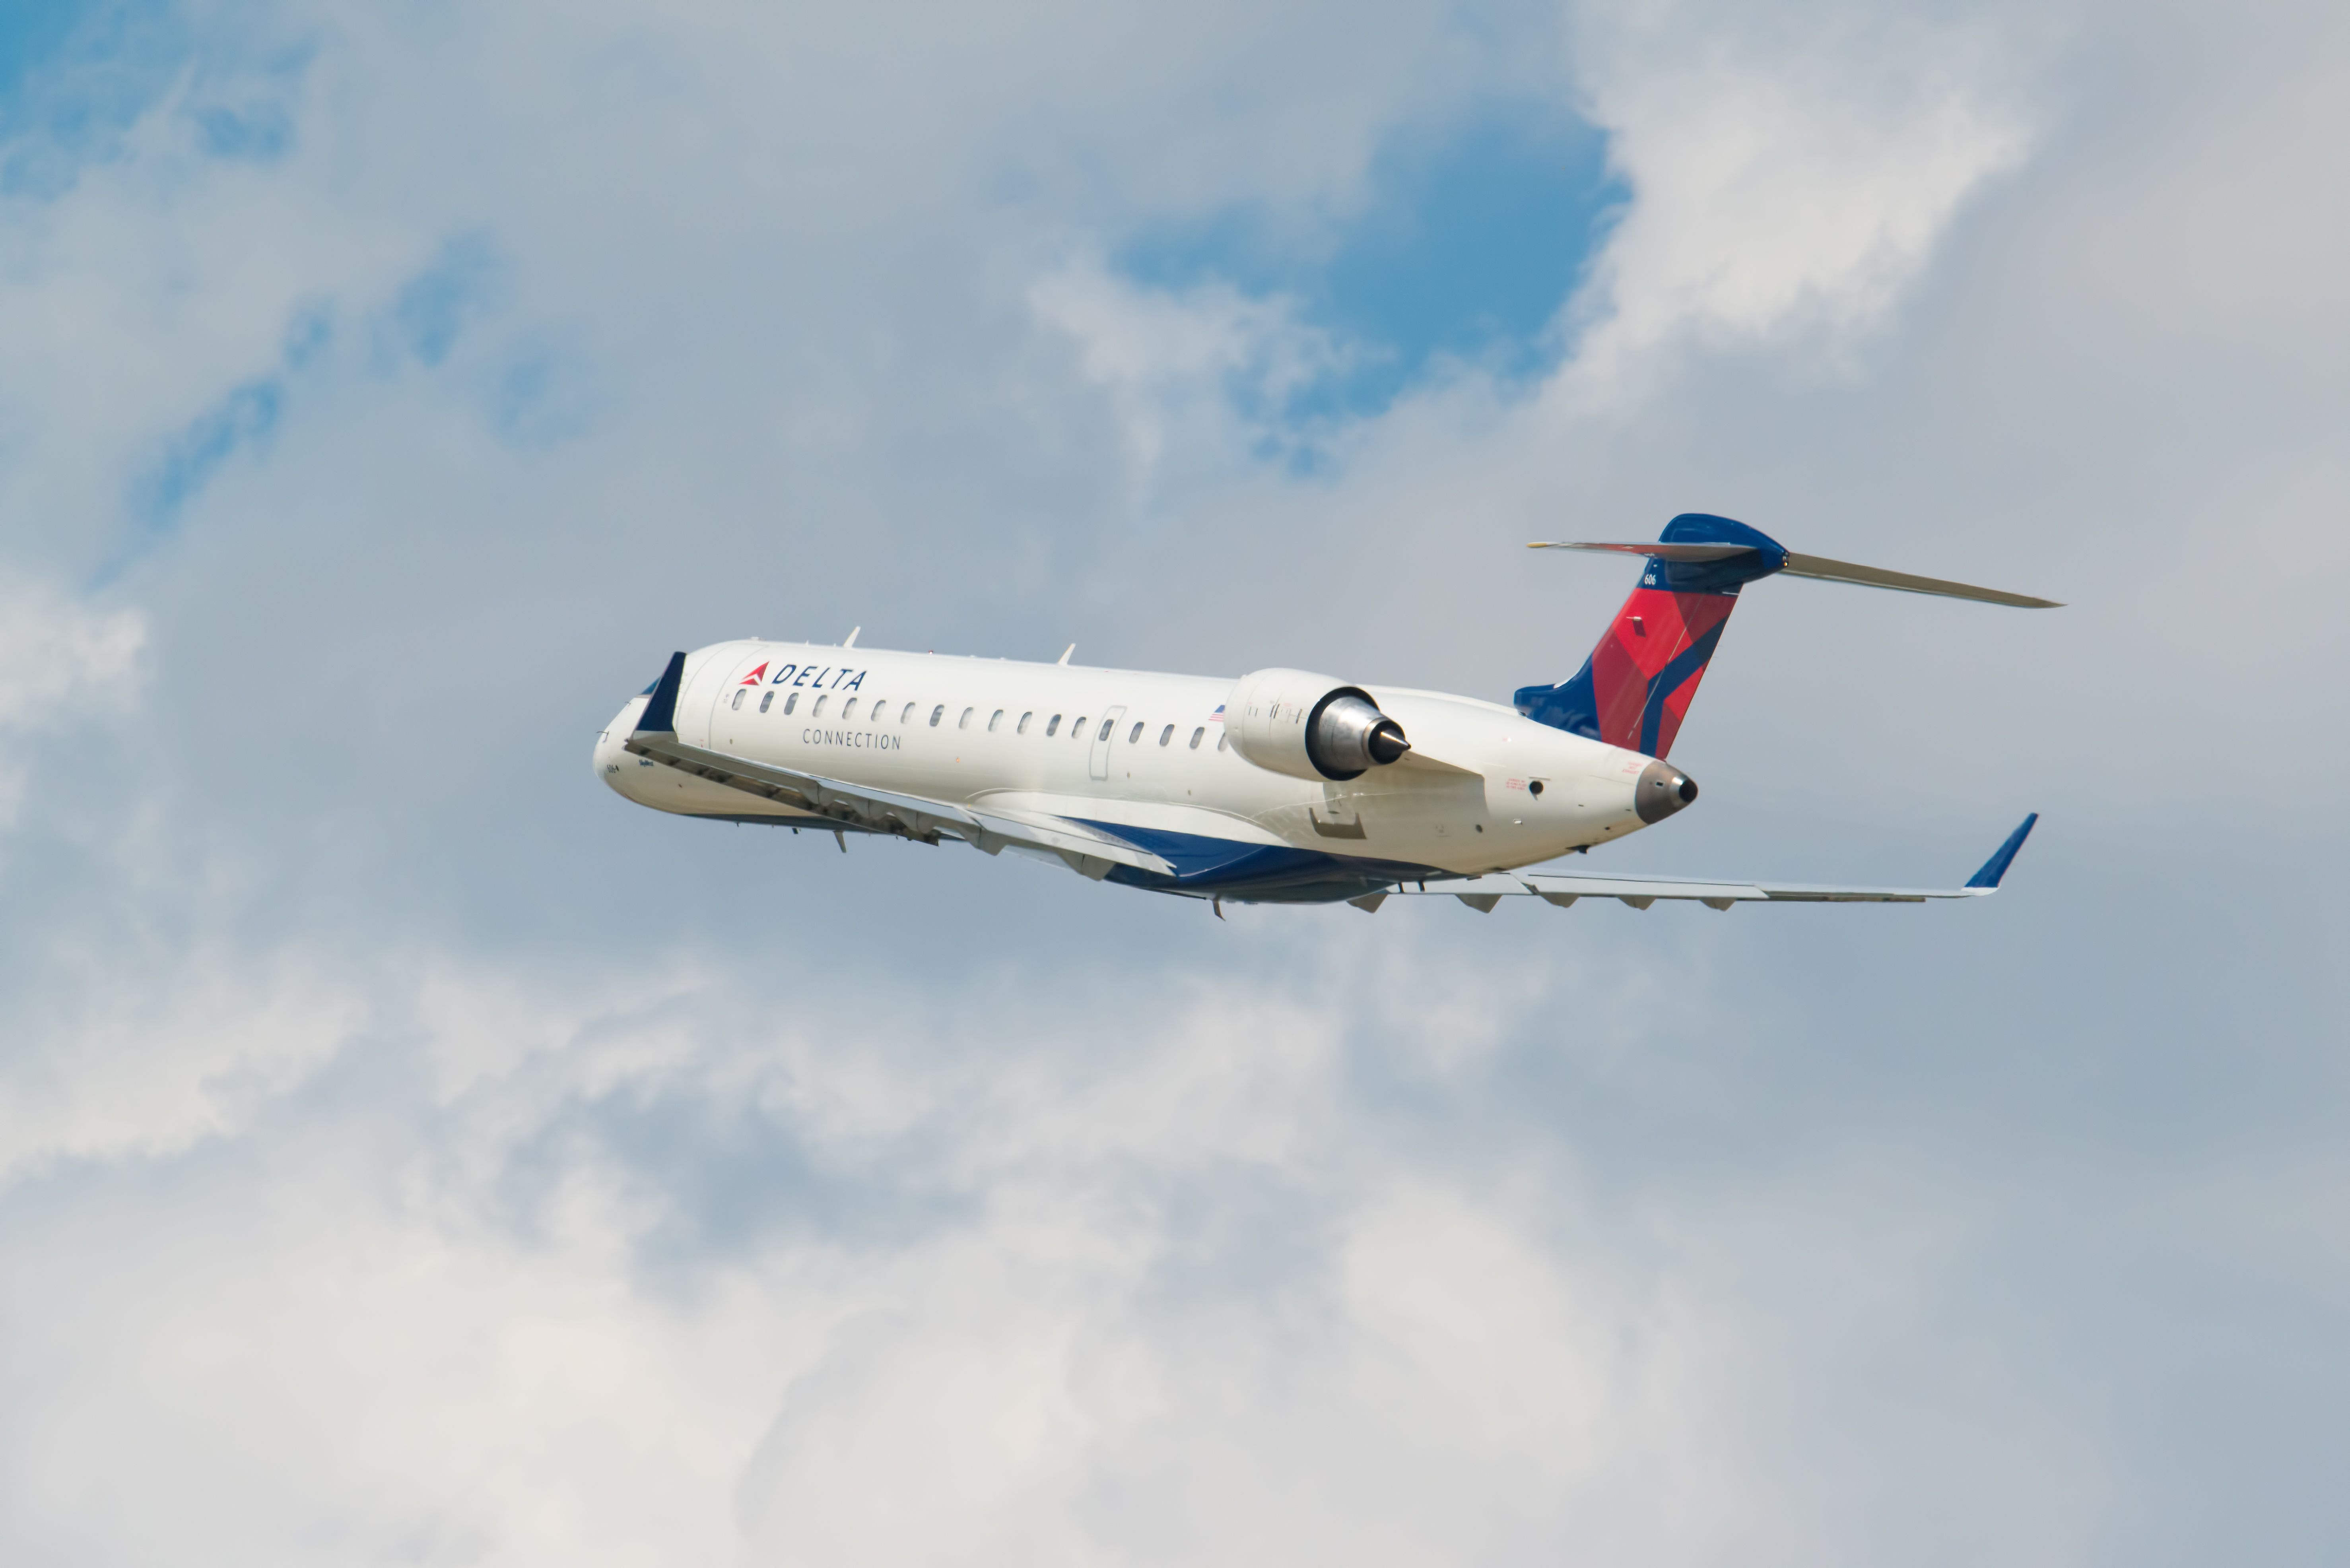 Delta Connection Bombardier CRJ700 taking off.